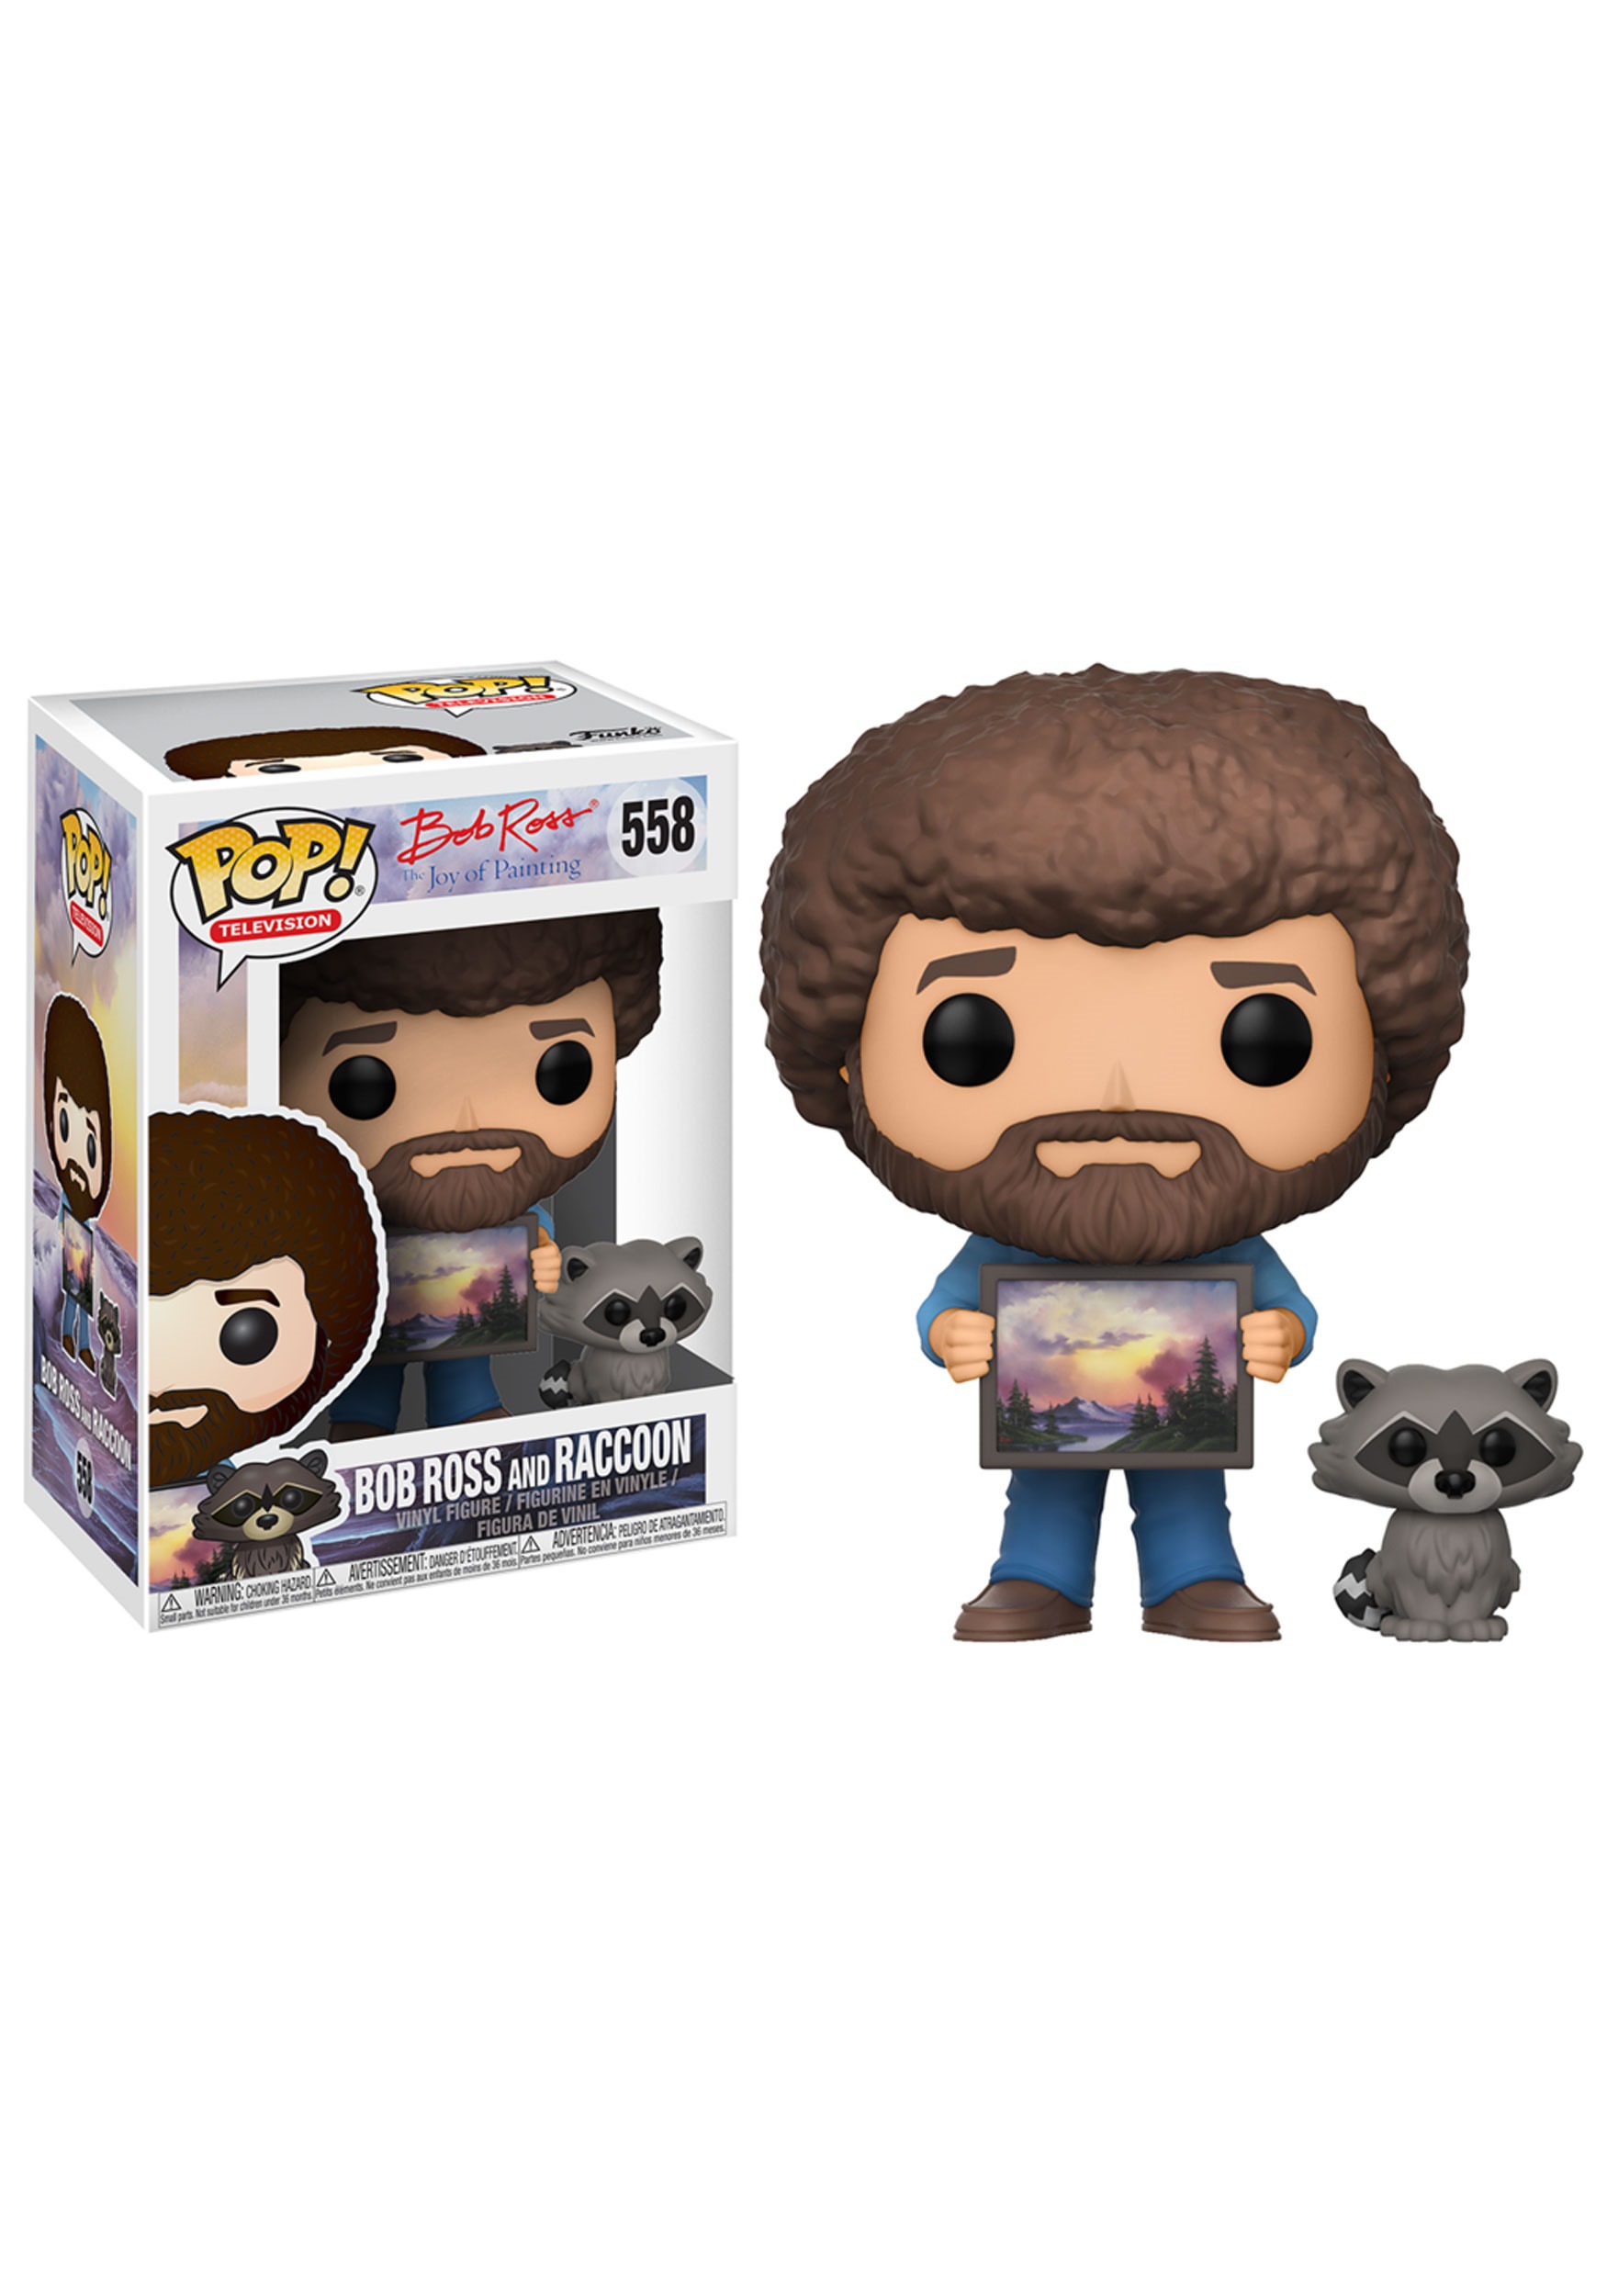 Funko Pop Bob Ross with Raccoon Bobble Head for sale online The Joy of Painting Television